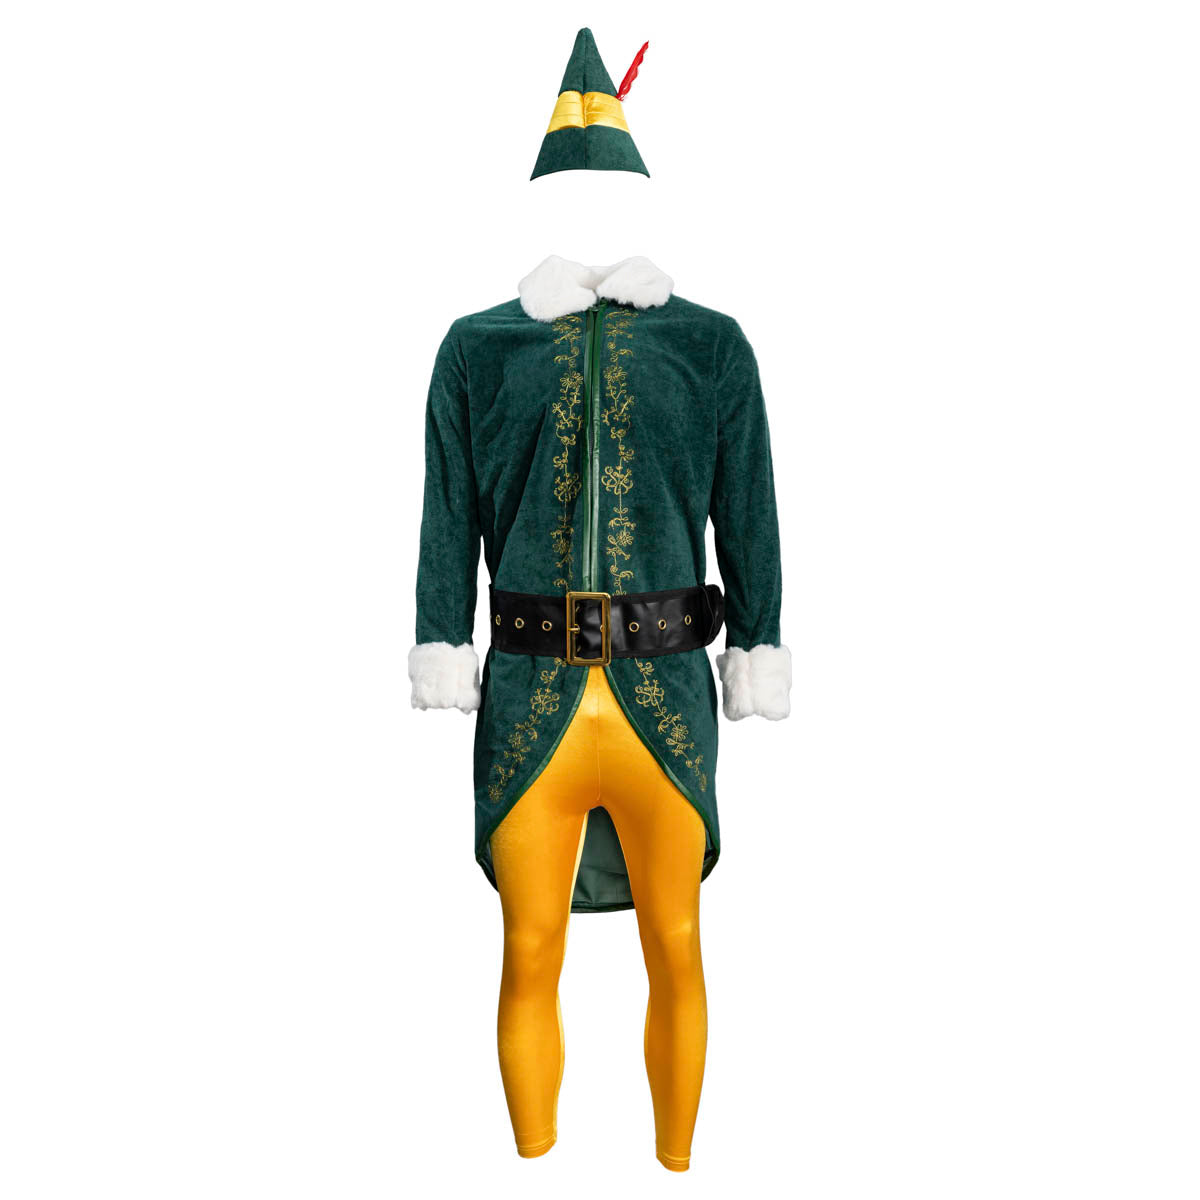 Christmas Elf Costume Transform into an Elf with this Deluxe Complete Set for Halloween Costume Cosplay